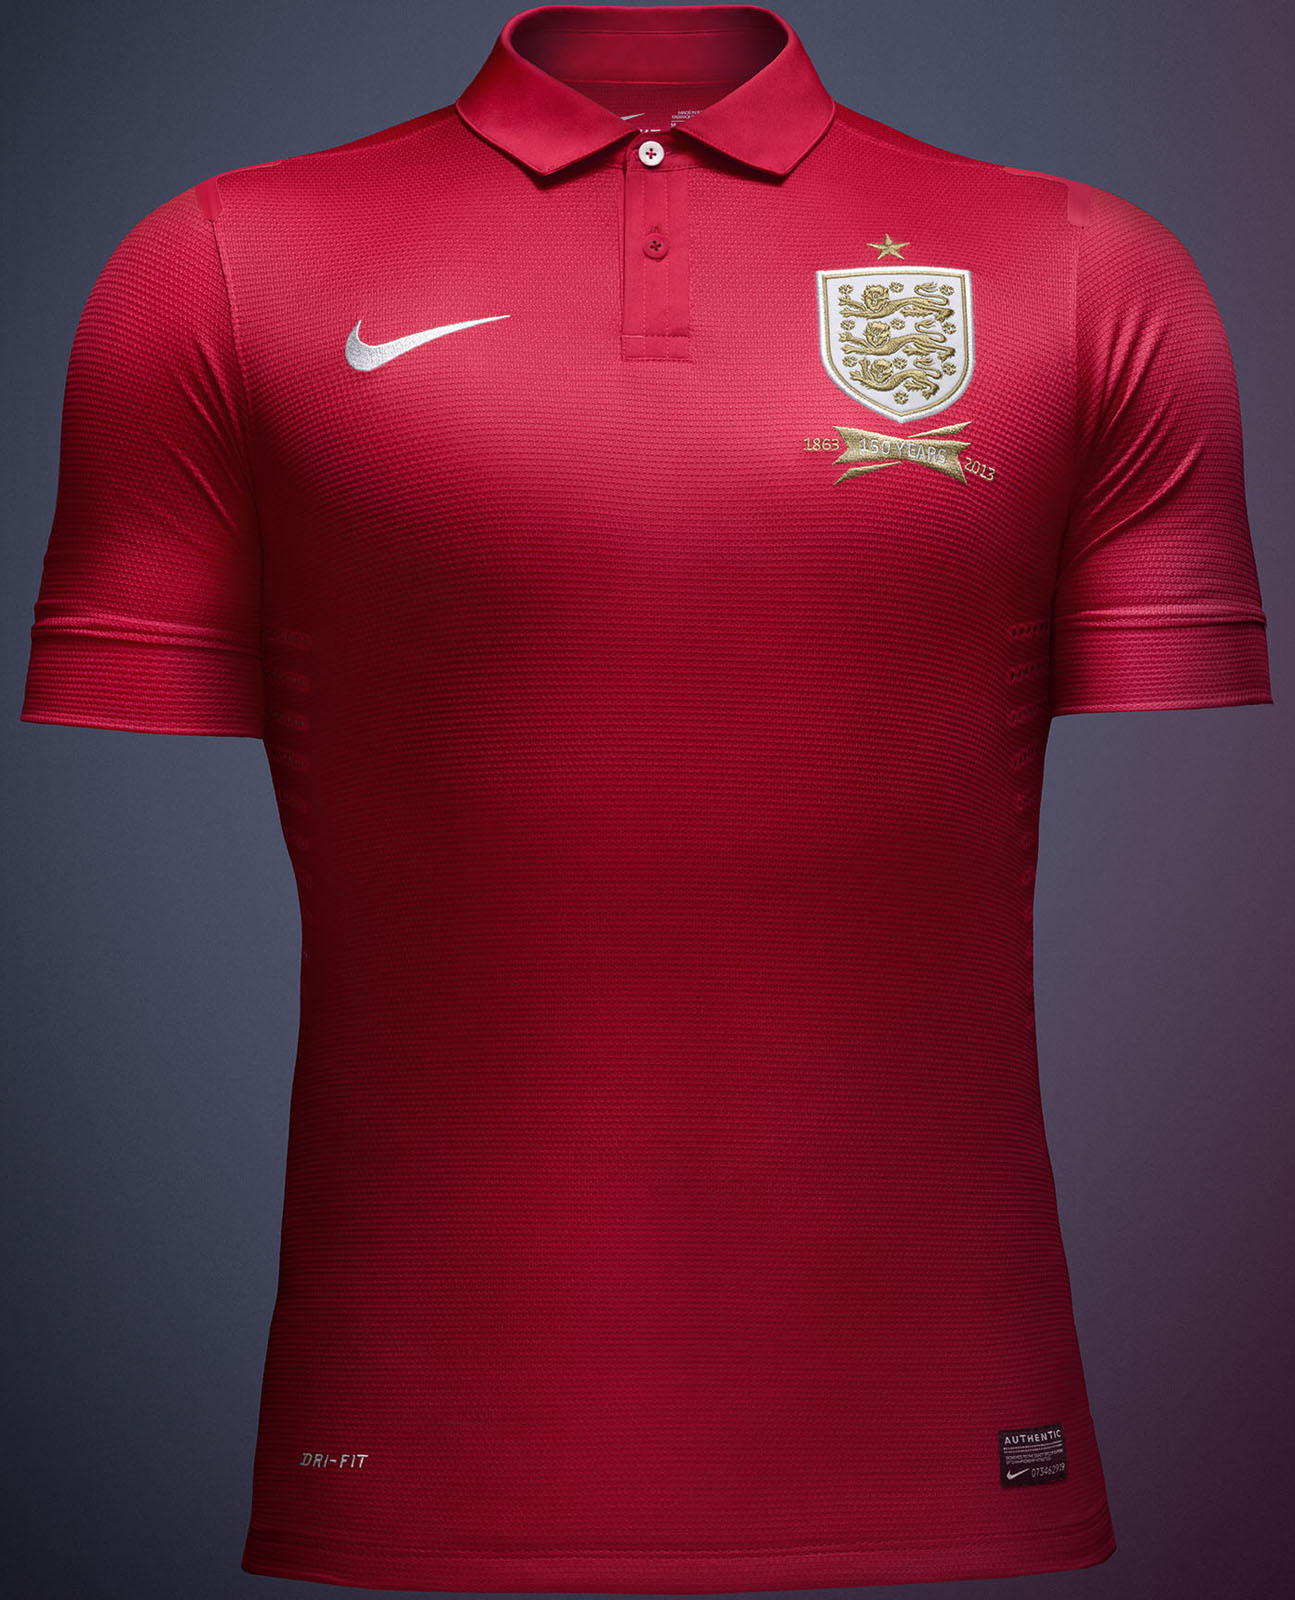 New Nike England 2013 Home and Away Kits Released Footy Headlines